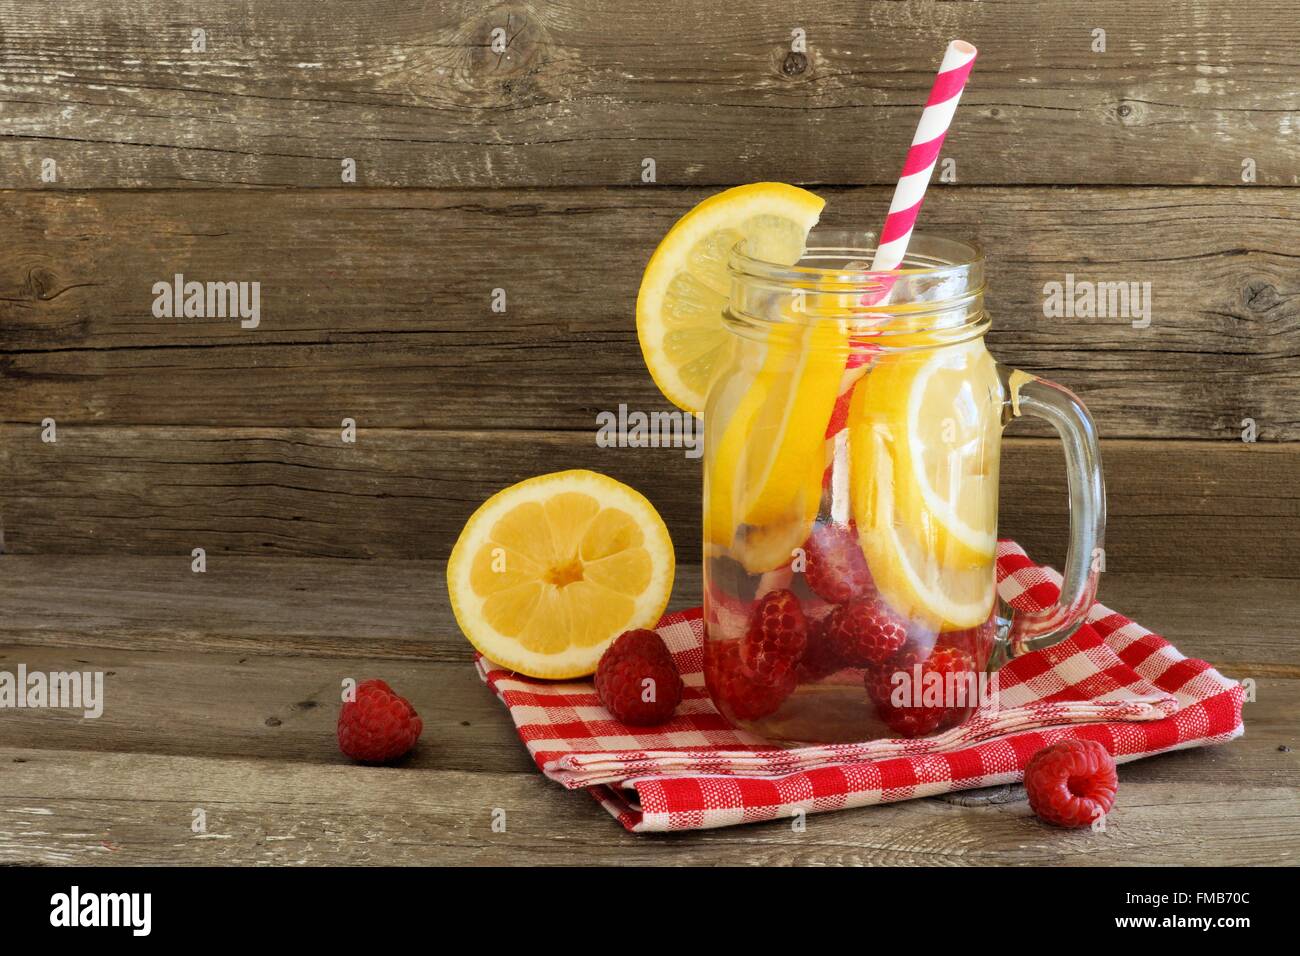 Detox water with lemon and raspberries in a jar with straw and cloth against a wood background Stock Photo